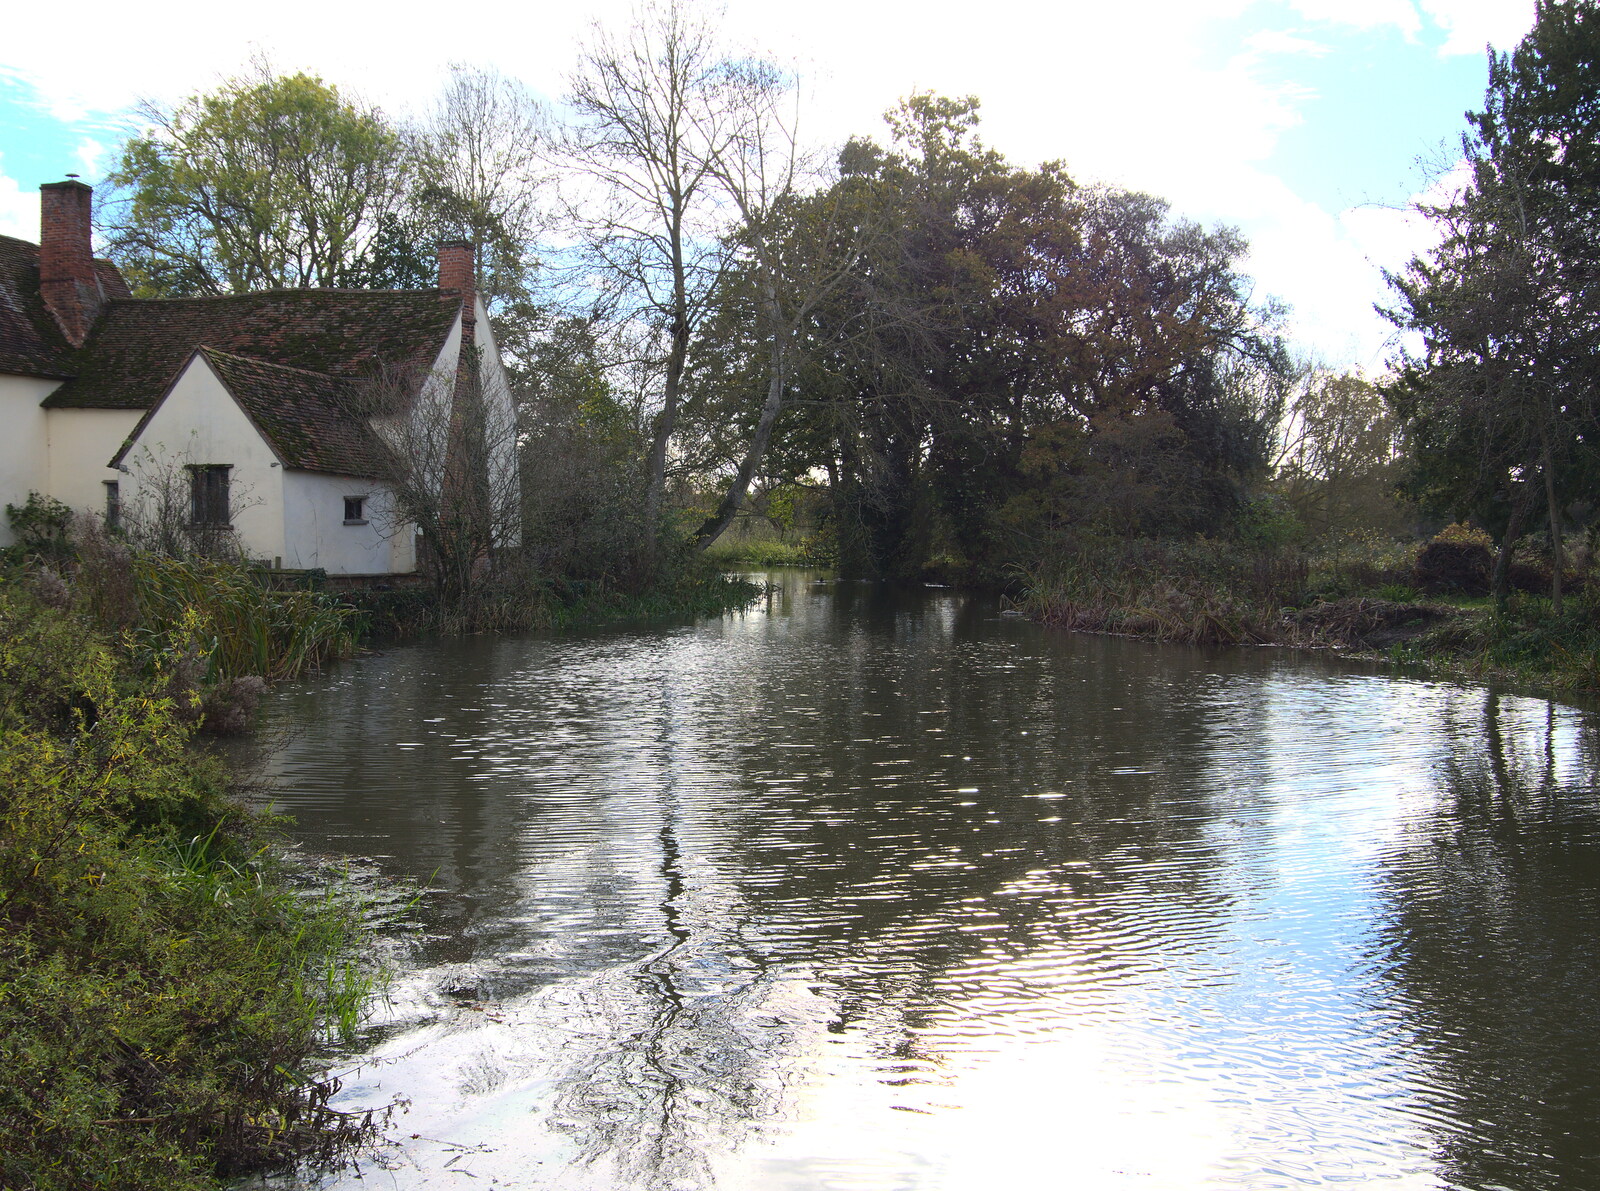 A Postcard from Flatford and Dedham, Suffolk and Essex, 9th November 2022: The location of the famous Hay Wain painting